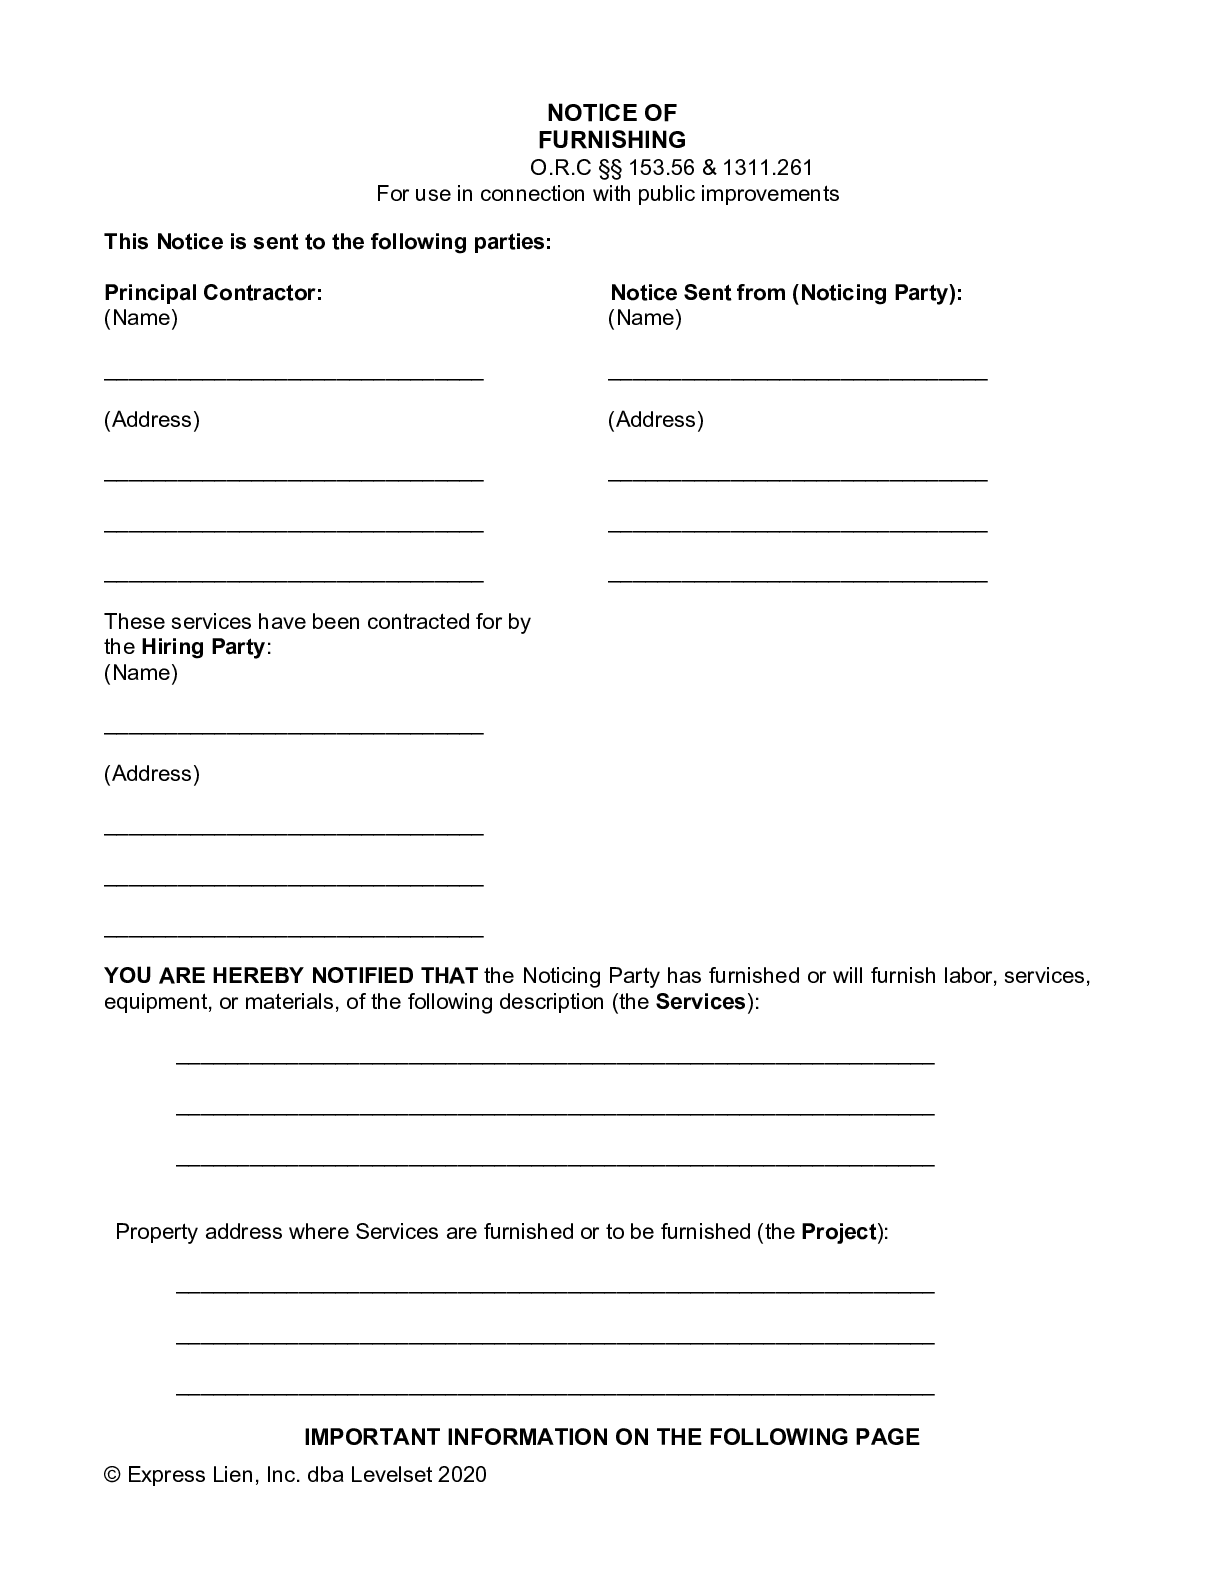 Ohio Notice of Furnishing Form (public projects) - free from